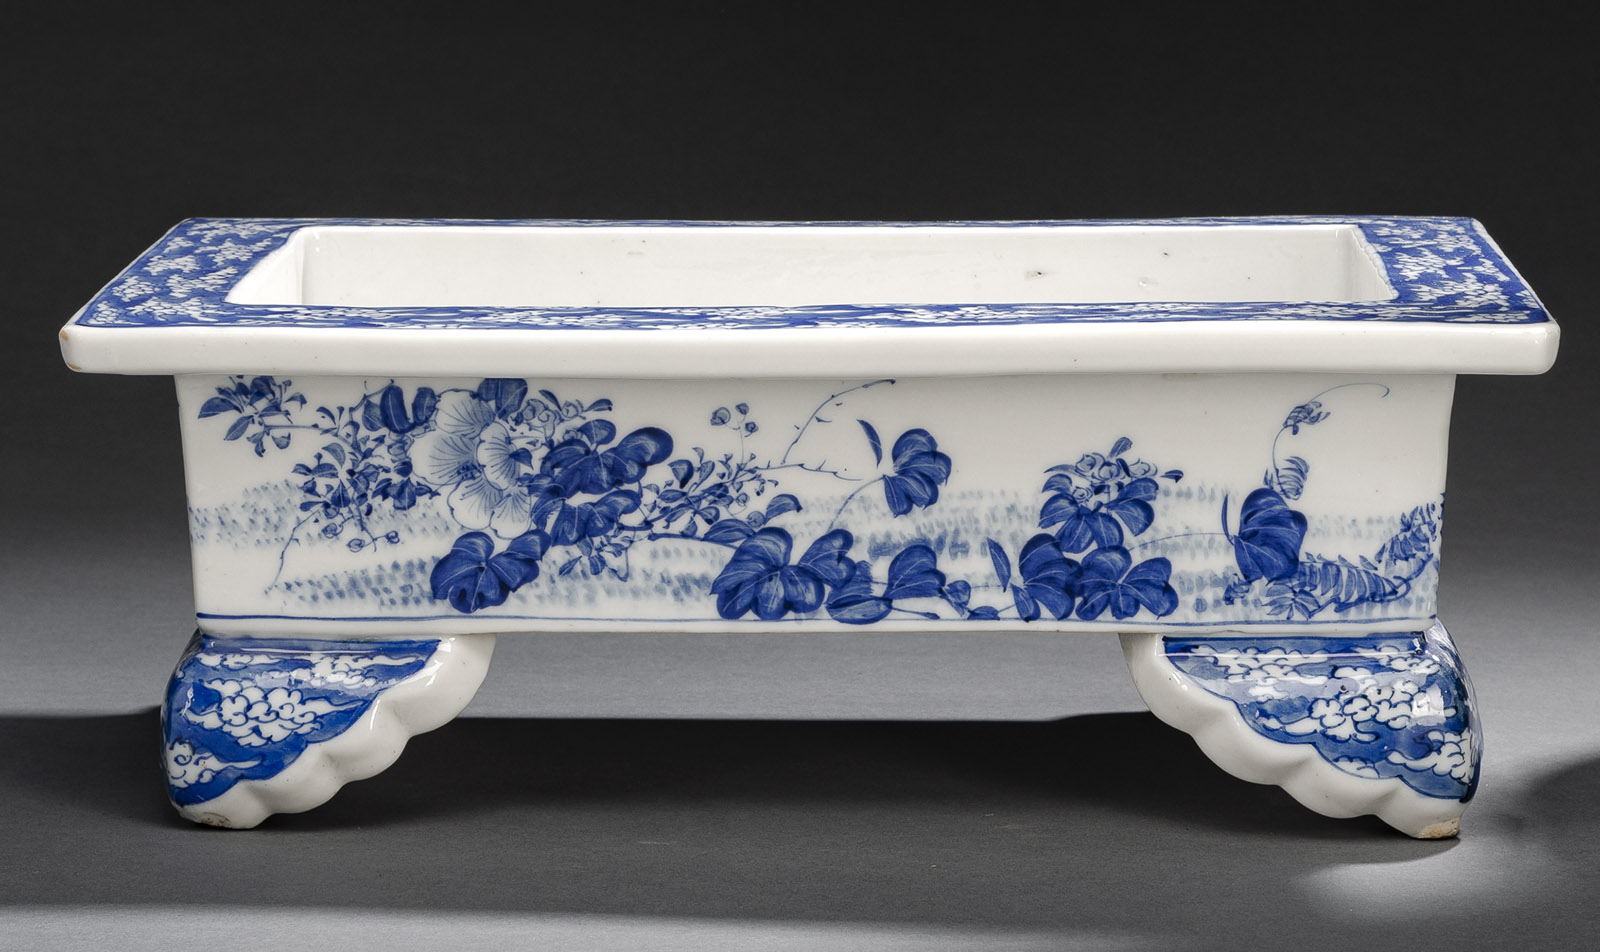 <b>A SQUARE -SHAPED PORCELIAN JARDINIERE WITH FLORAL MOTIFS AND CLOUD PATTERNS IN UNDERGLAZE-BLUE</b>